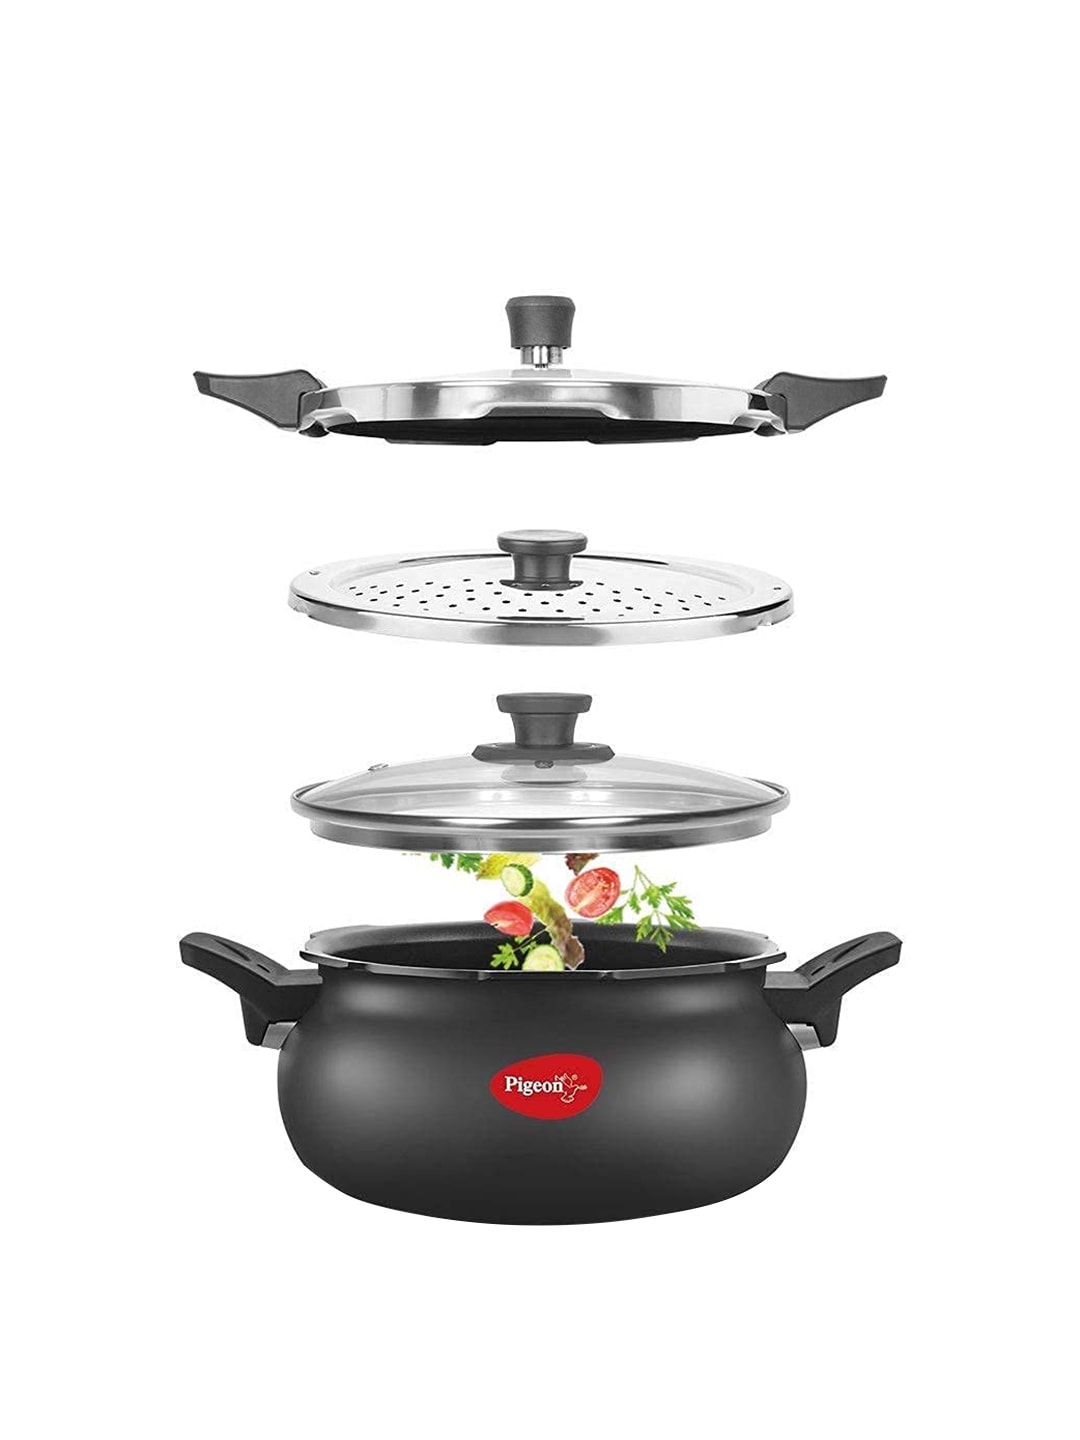 Pigeon Black Aluminium Outer Lid Super Cooker with Induction - 5 L